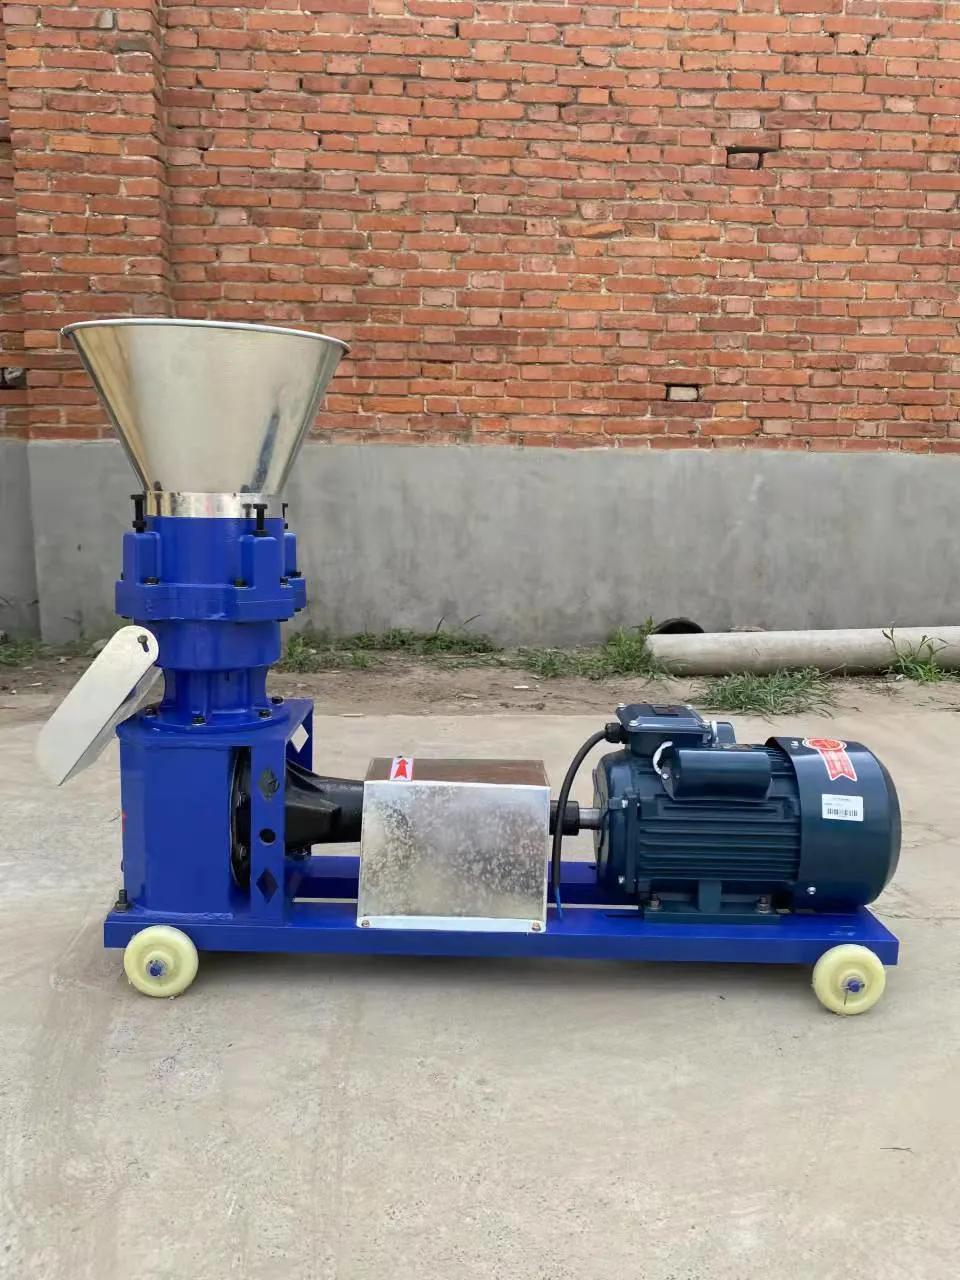 Farms Use Household Small Manual Pelletized Poultry Livestock Animal Feed Pellet Machine Mill for Poultry Livestock Granulator